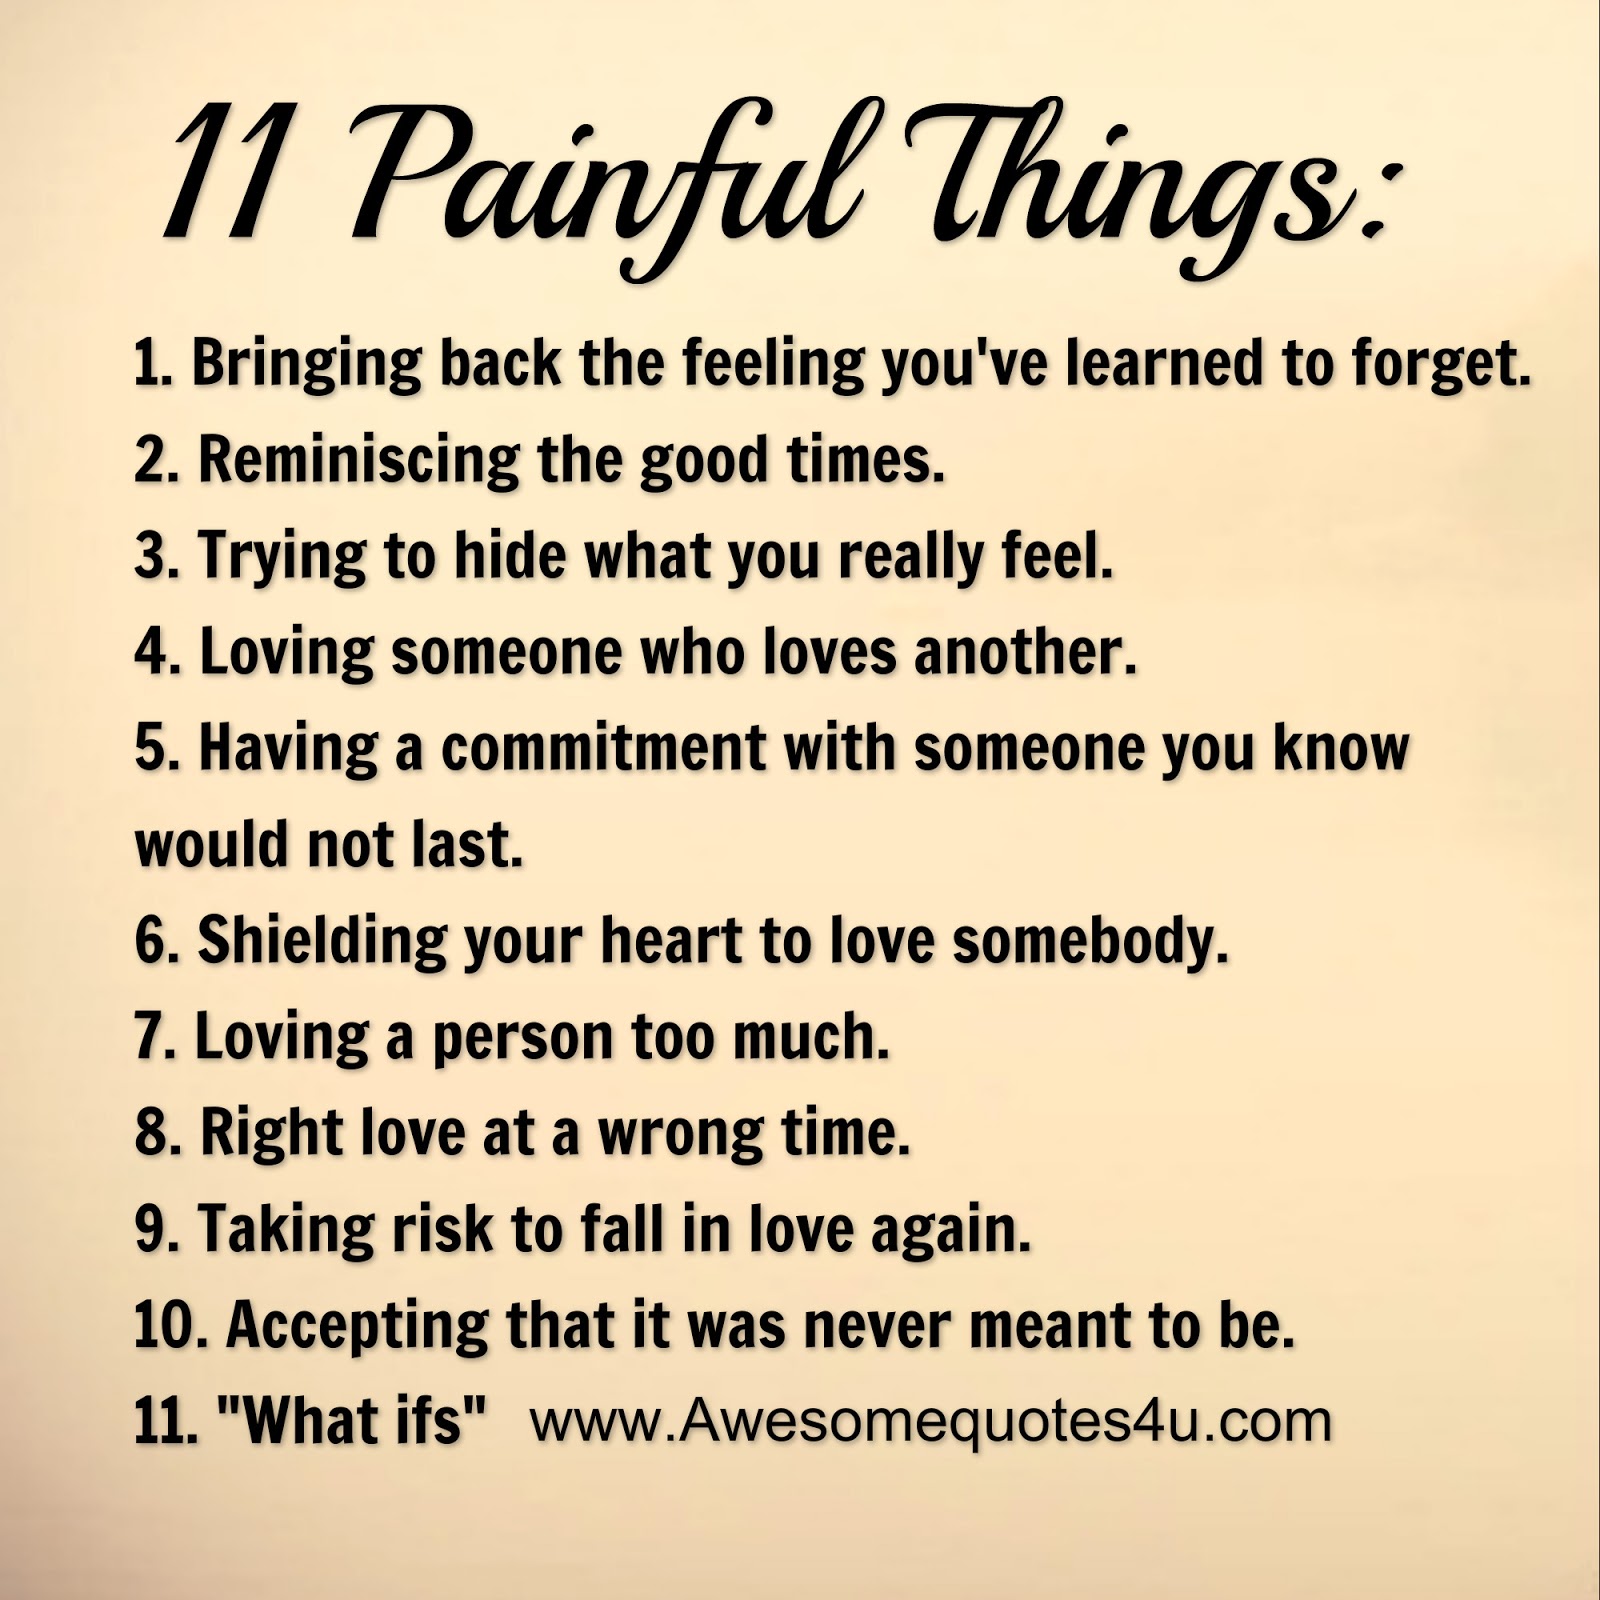 Awesomequotes4u.com: 11 Painful Things